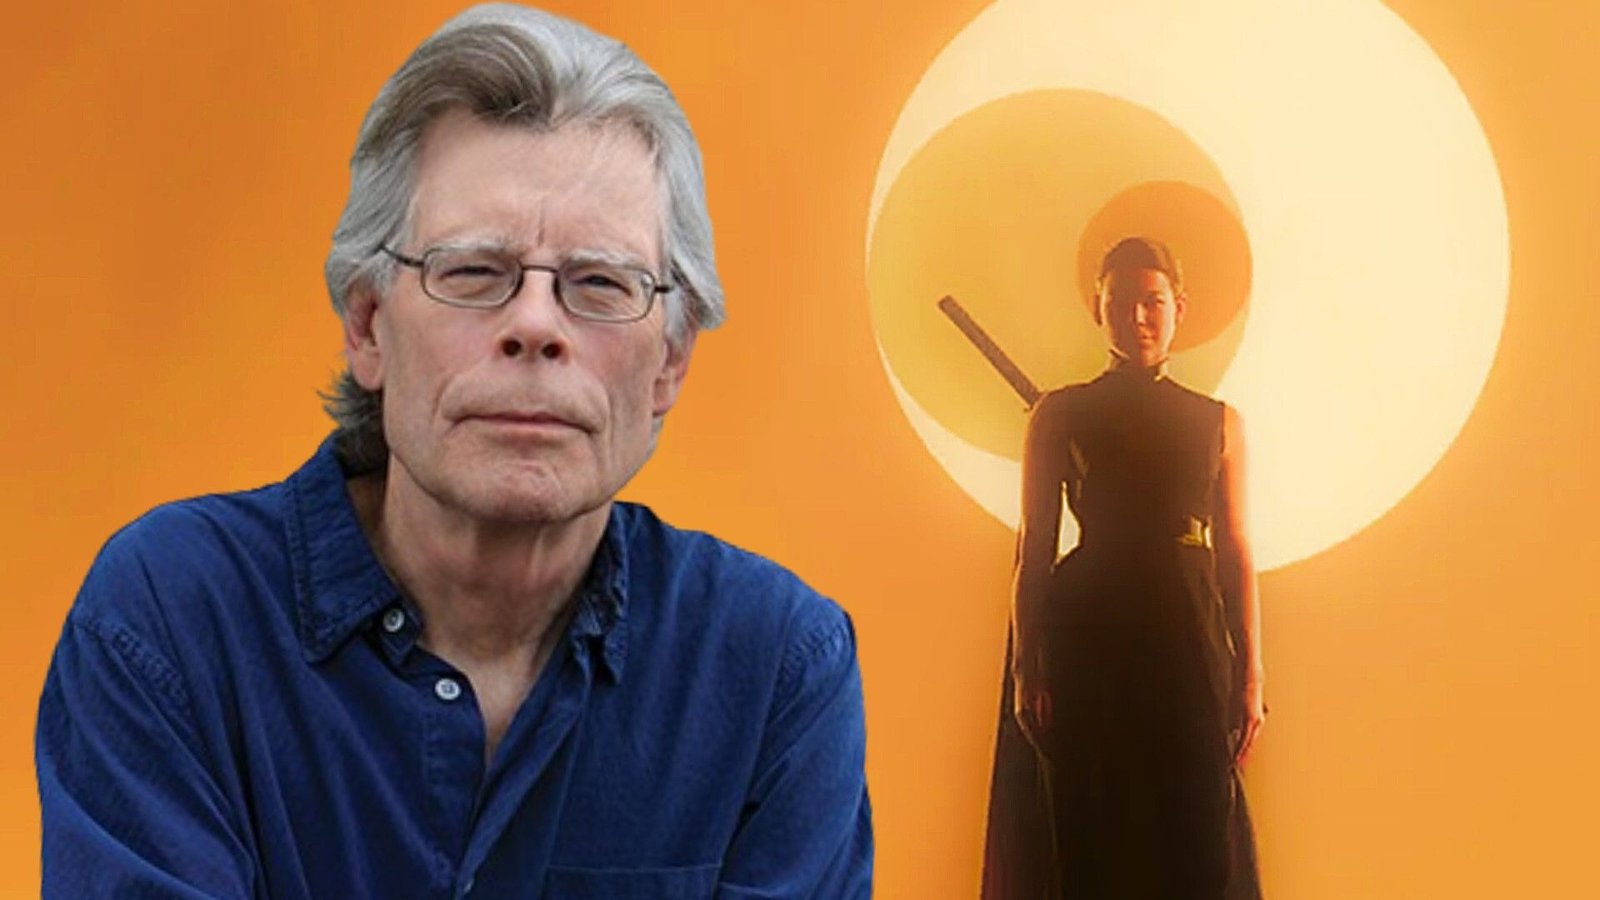 Stephen King Heaps Praise on New Netflix Sci-Fi Series: 'Sprawling, Thought-Provoking, Immersive'